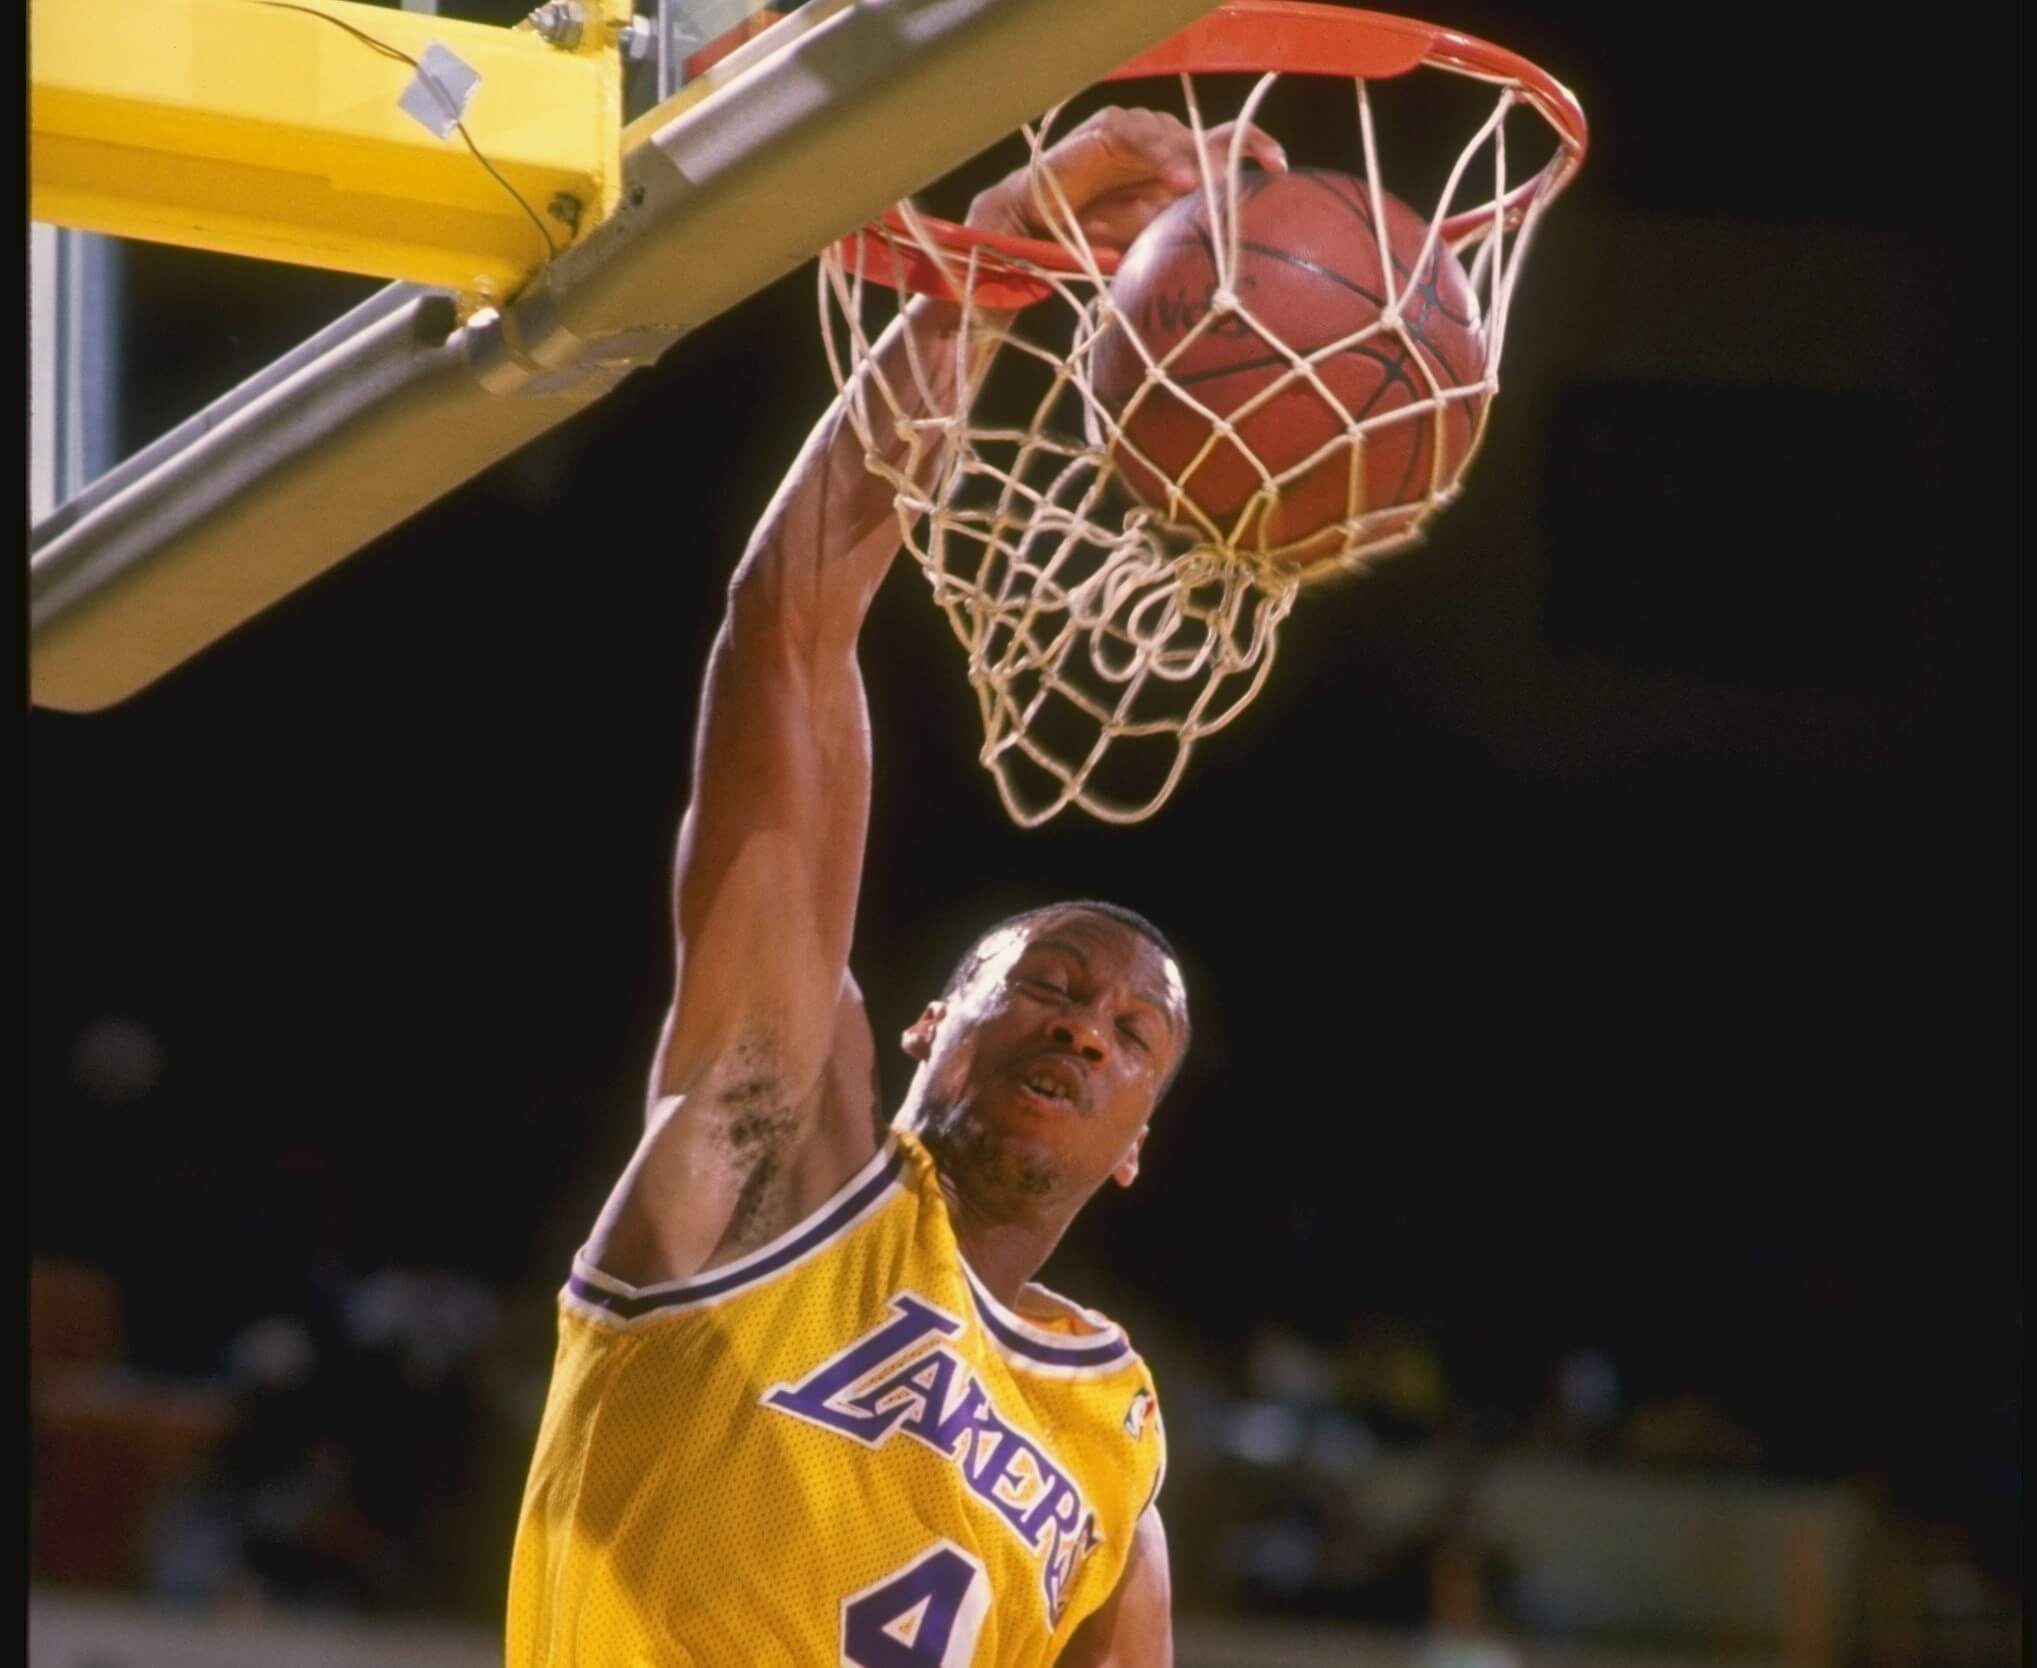 Byron Scott of the Los Angeles Lakers slam dunks during a game.